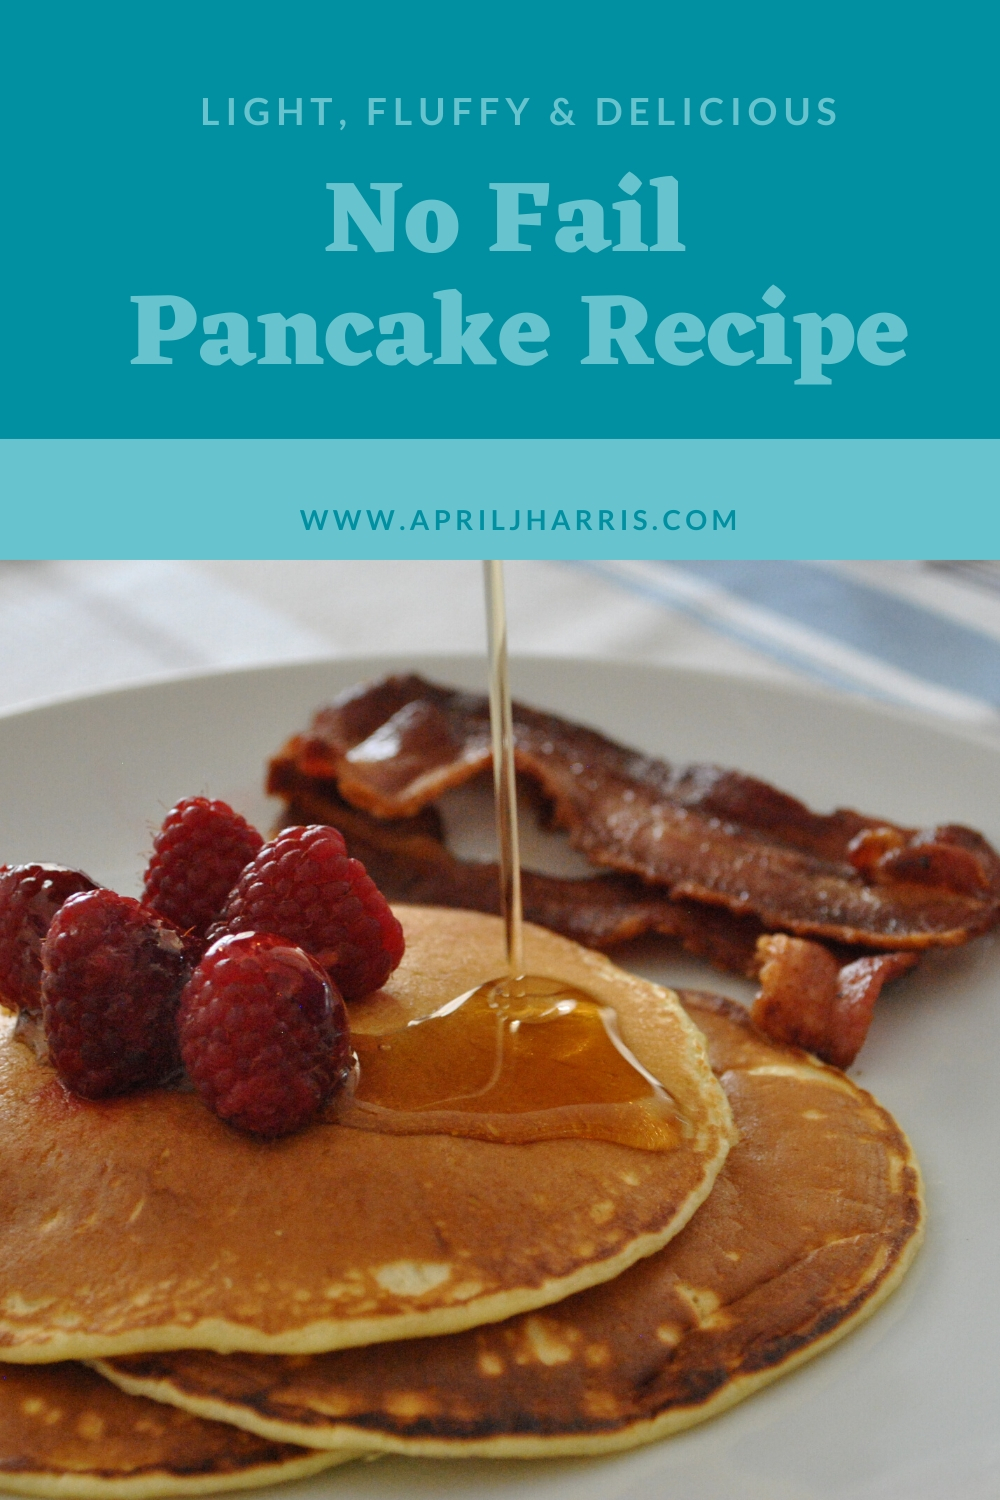 No Fail Pancake Recipe - Light Fluffy and Delicious Every Time